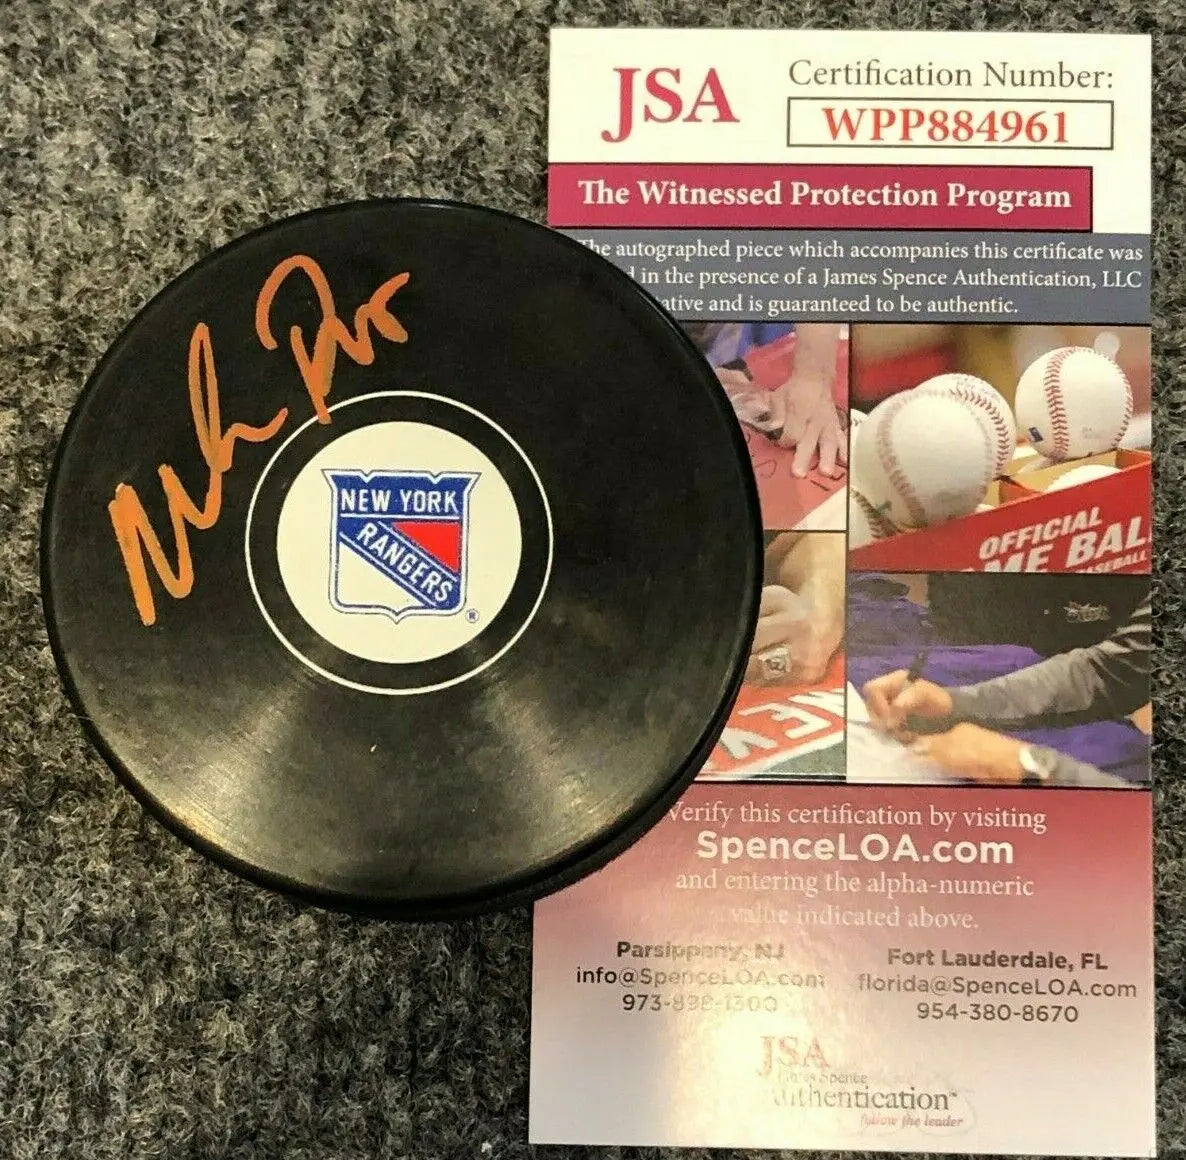 MVP Authentics Mike Richter Autographed Signed N.Y. Rangers Logo Puck Jsa Coa 80.10 sports jersey framing , jersey framing